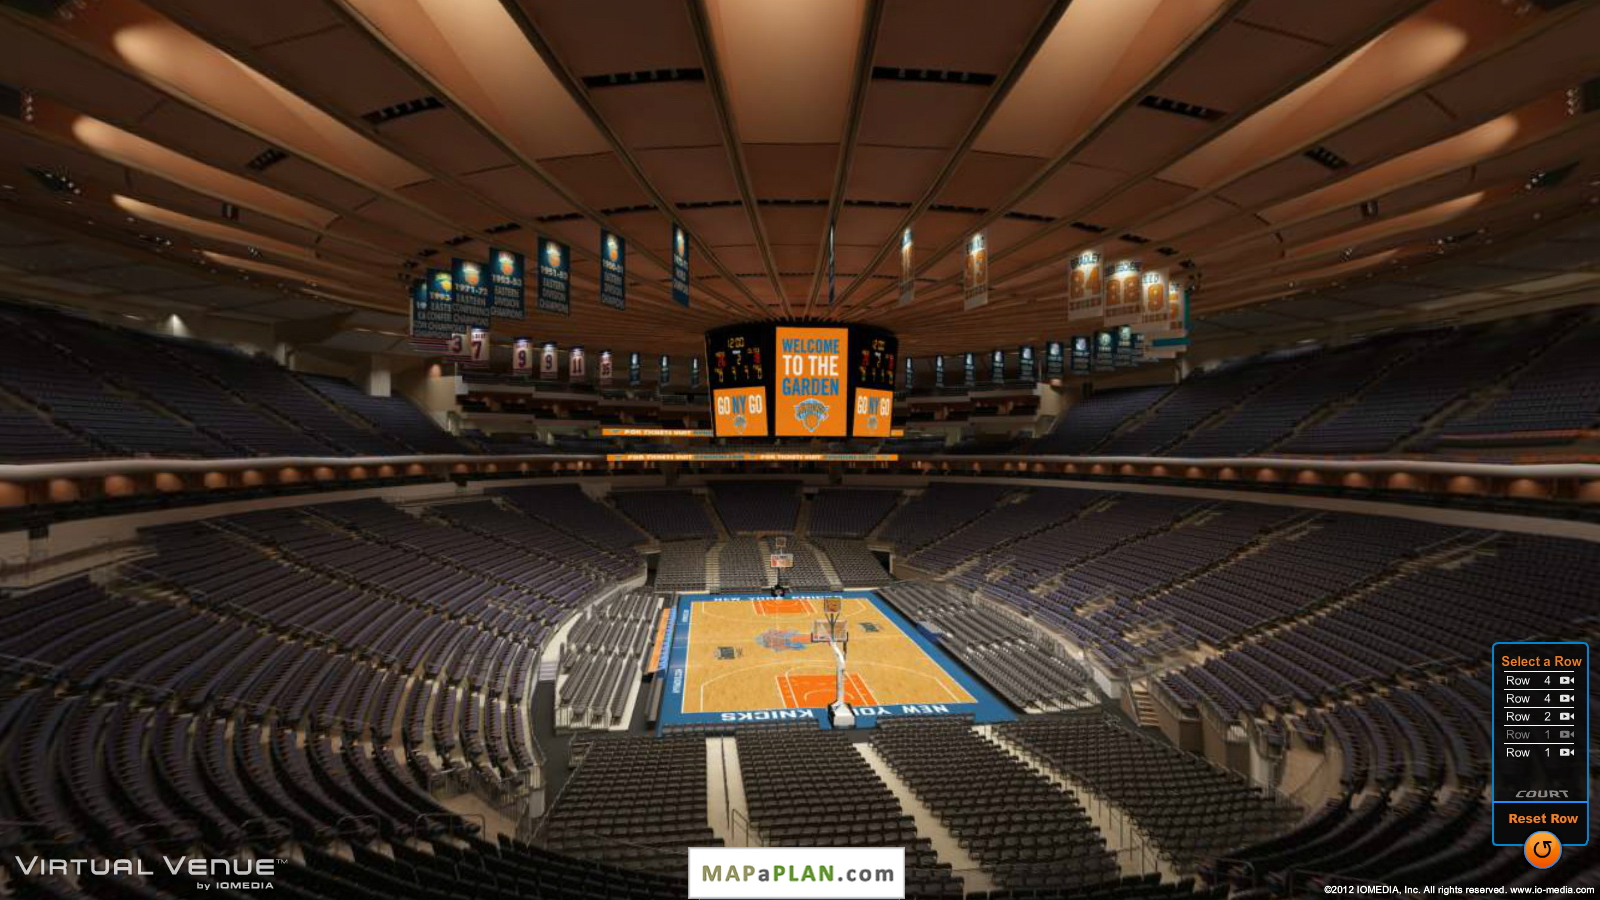 Madison Square Garden seating chart View from section 217